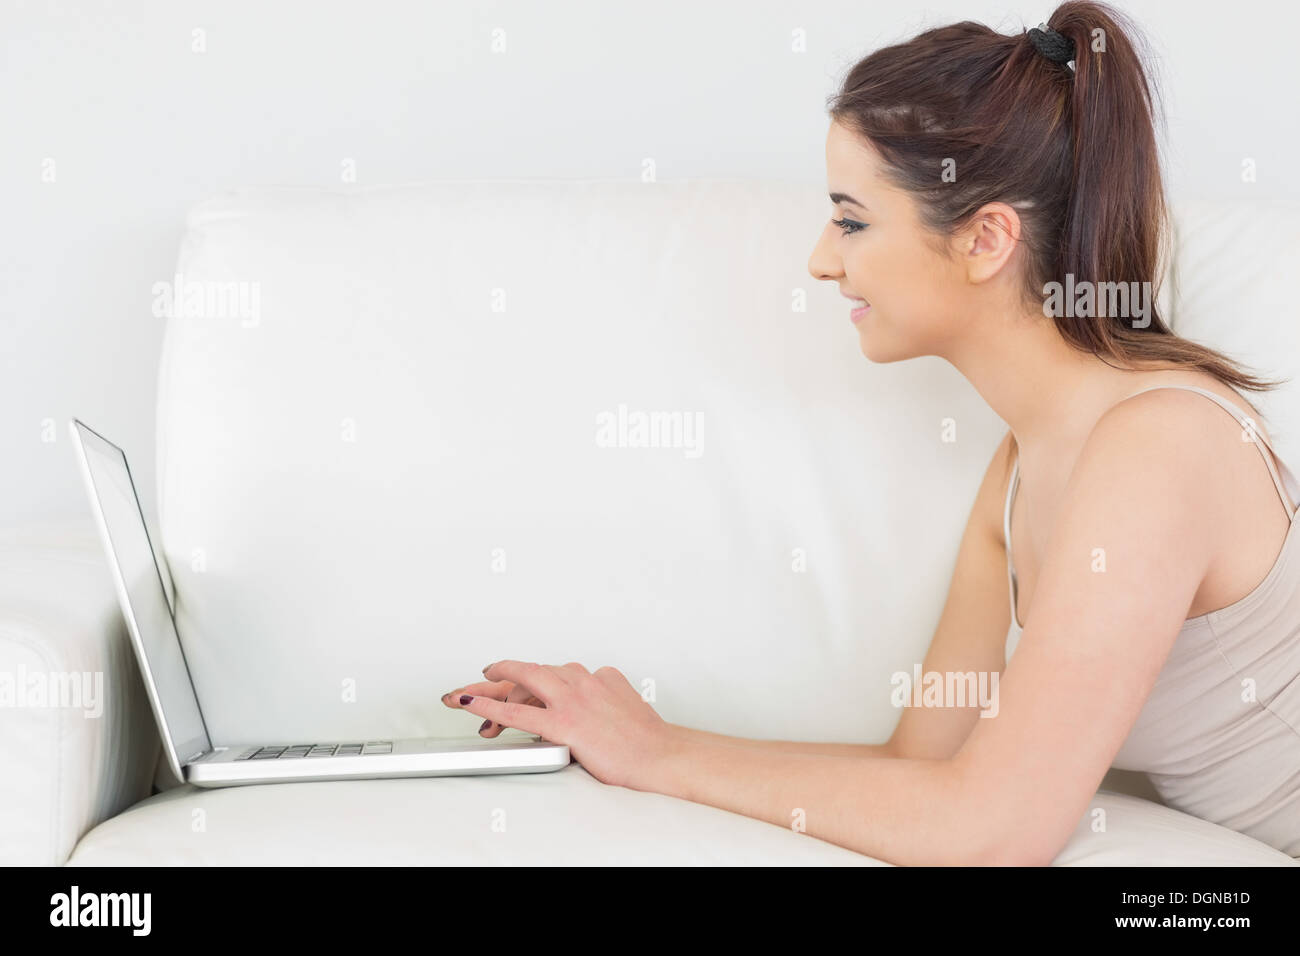 Glad brunette woman using her notebook Stock Photo